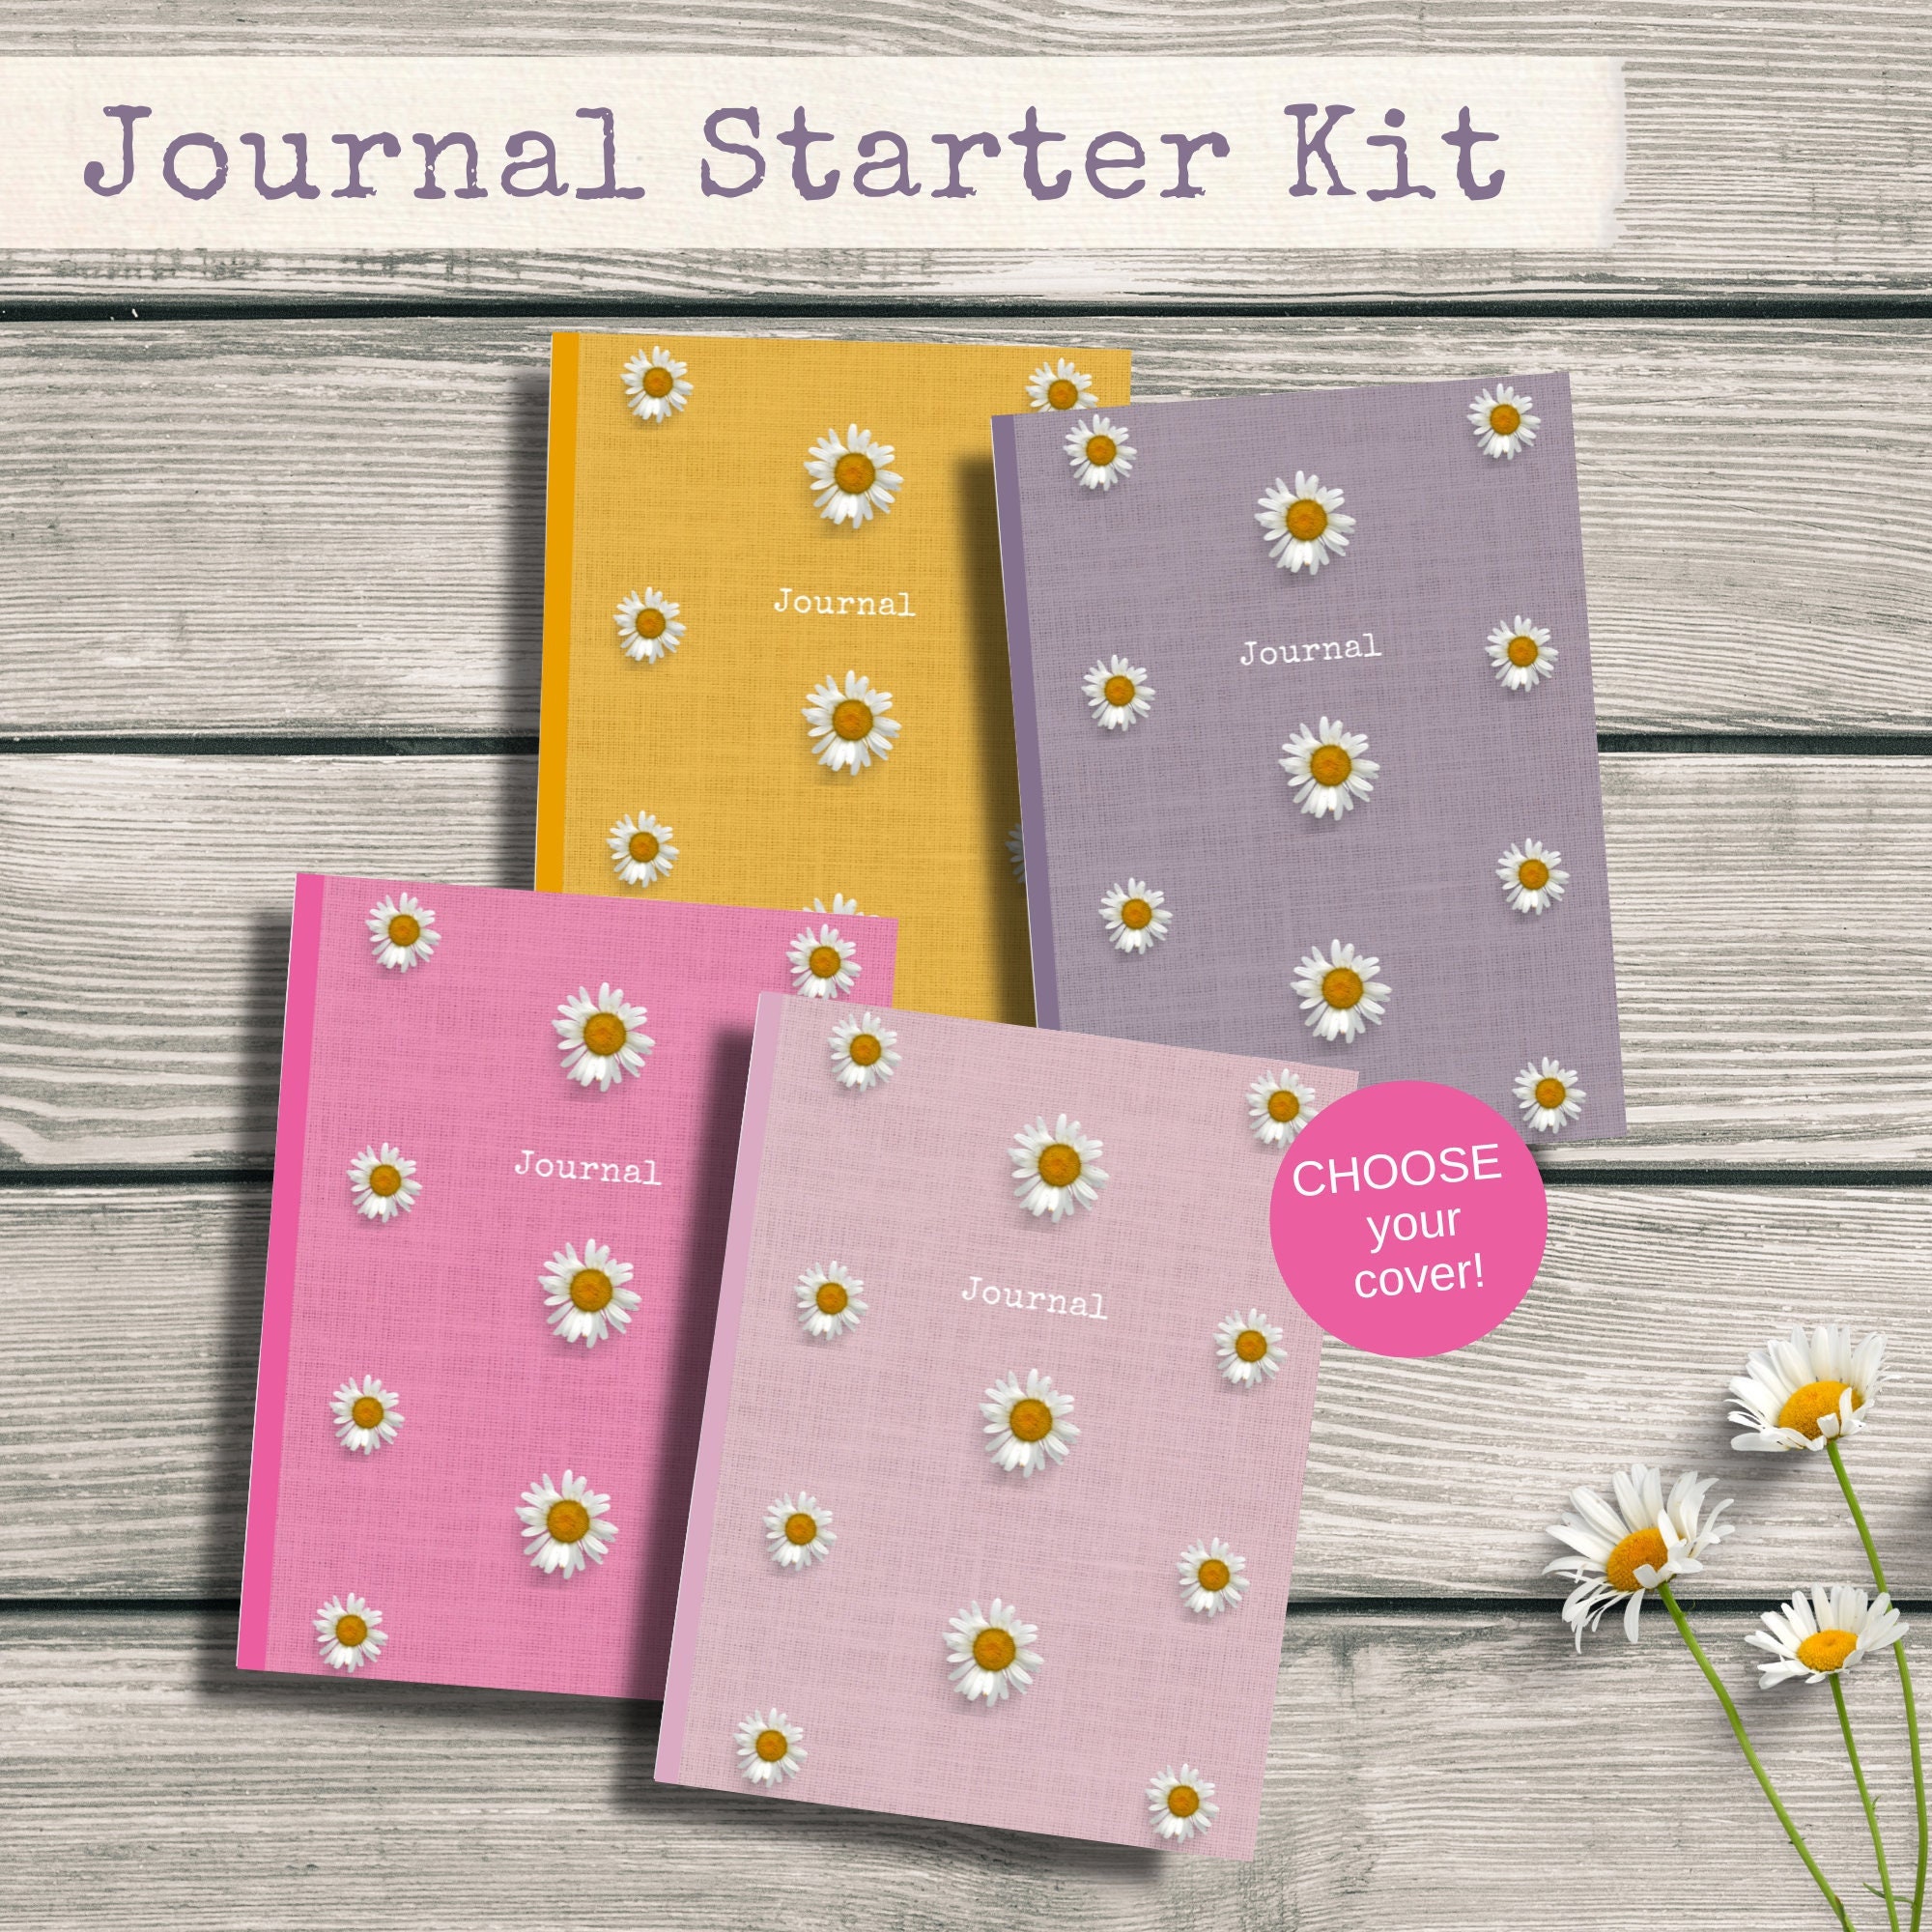 Junk Journal DIY Kit / Junk Journal Kit With Instructions / Create Your Own  Junk Journal 